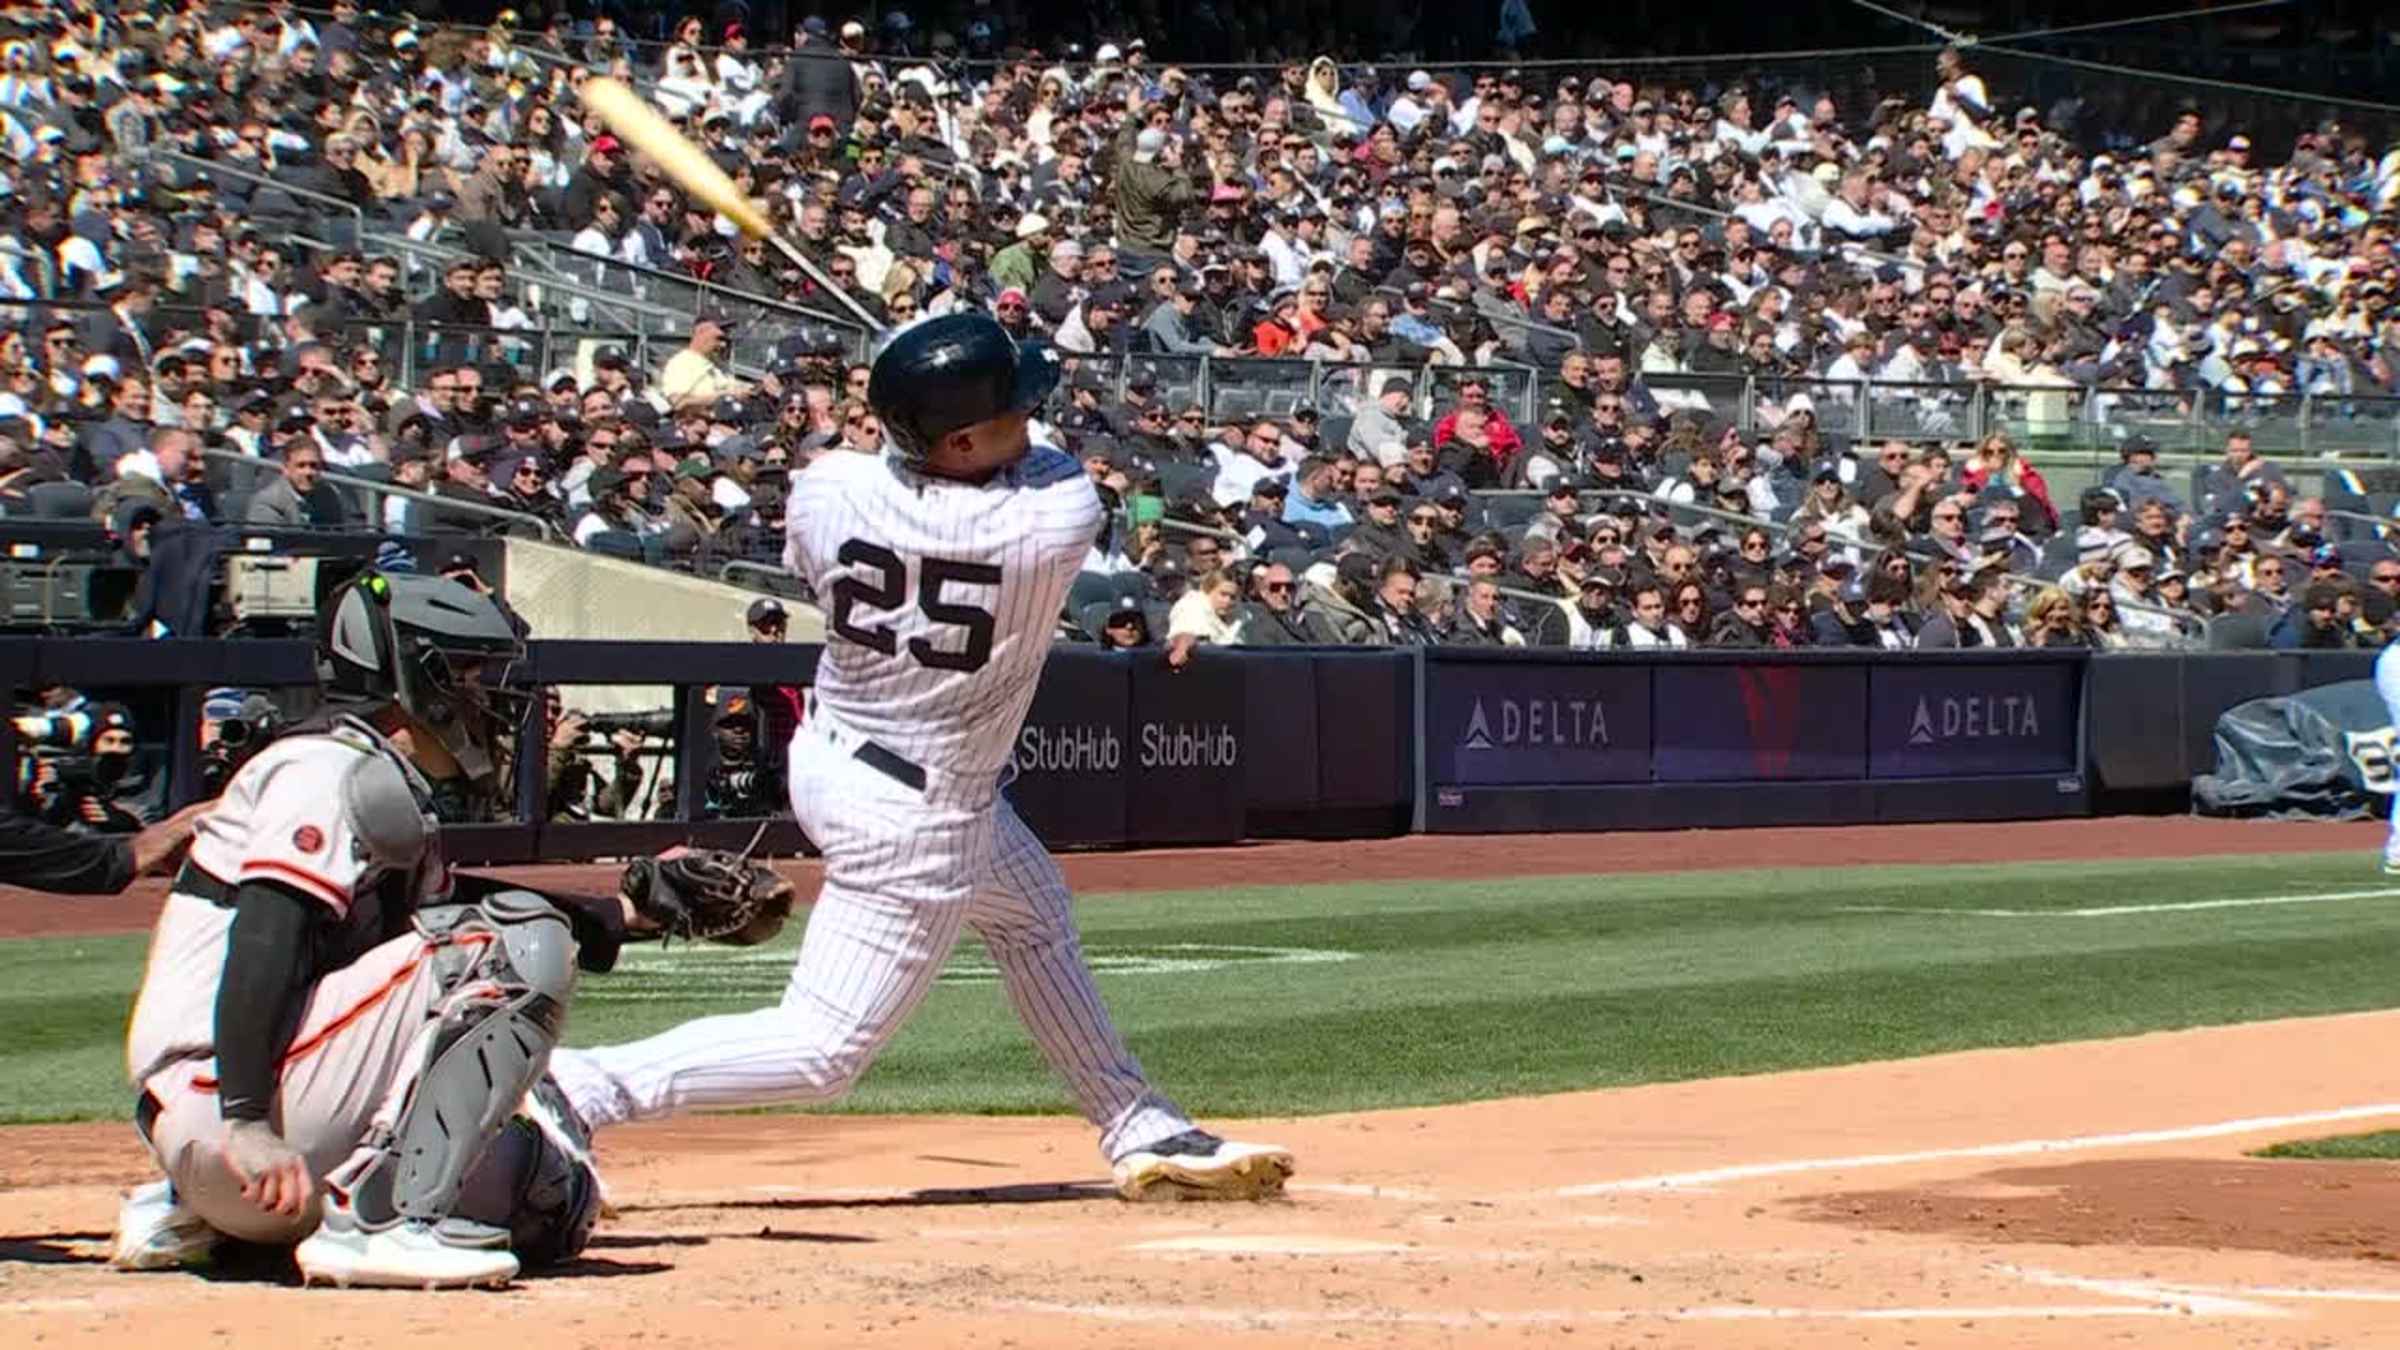 New York Yankees' Gleyber Torres in action during the MLB London